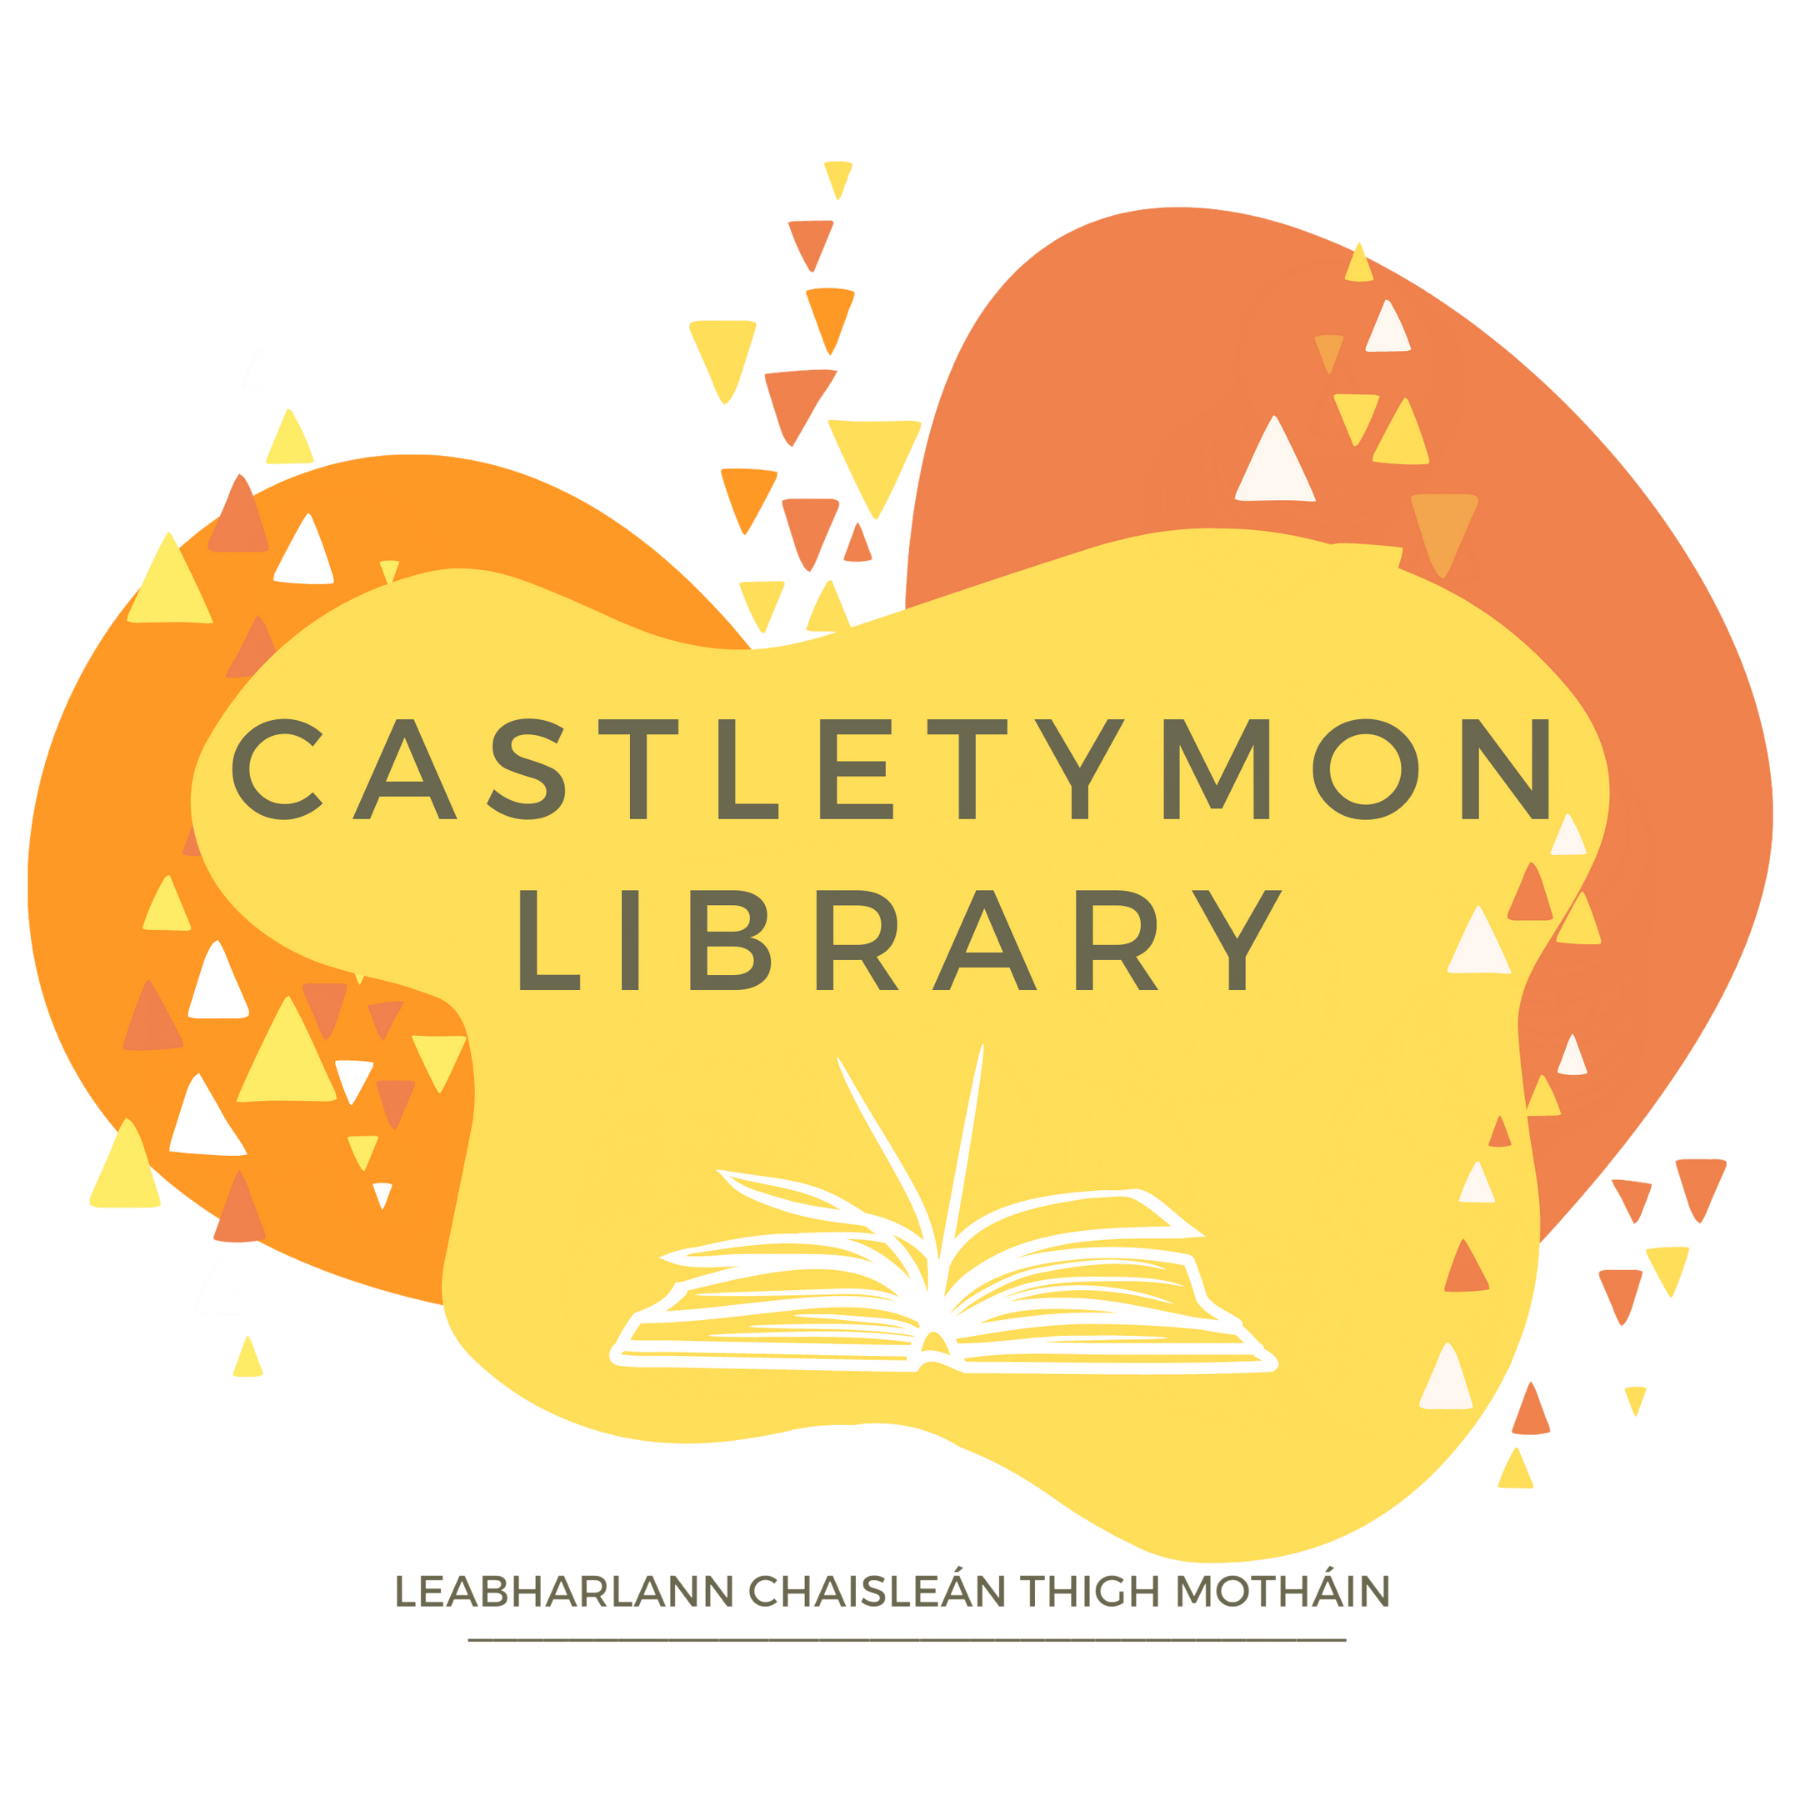 Castletymon Library Events March/April 2023 sumamry image